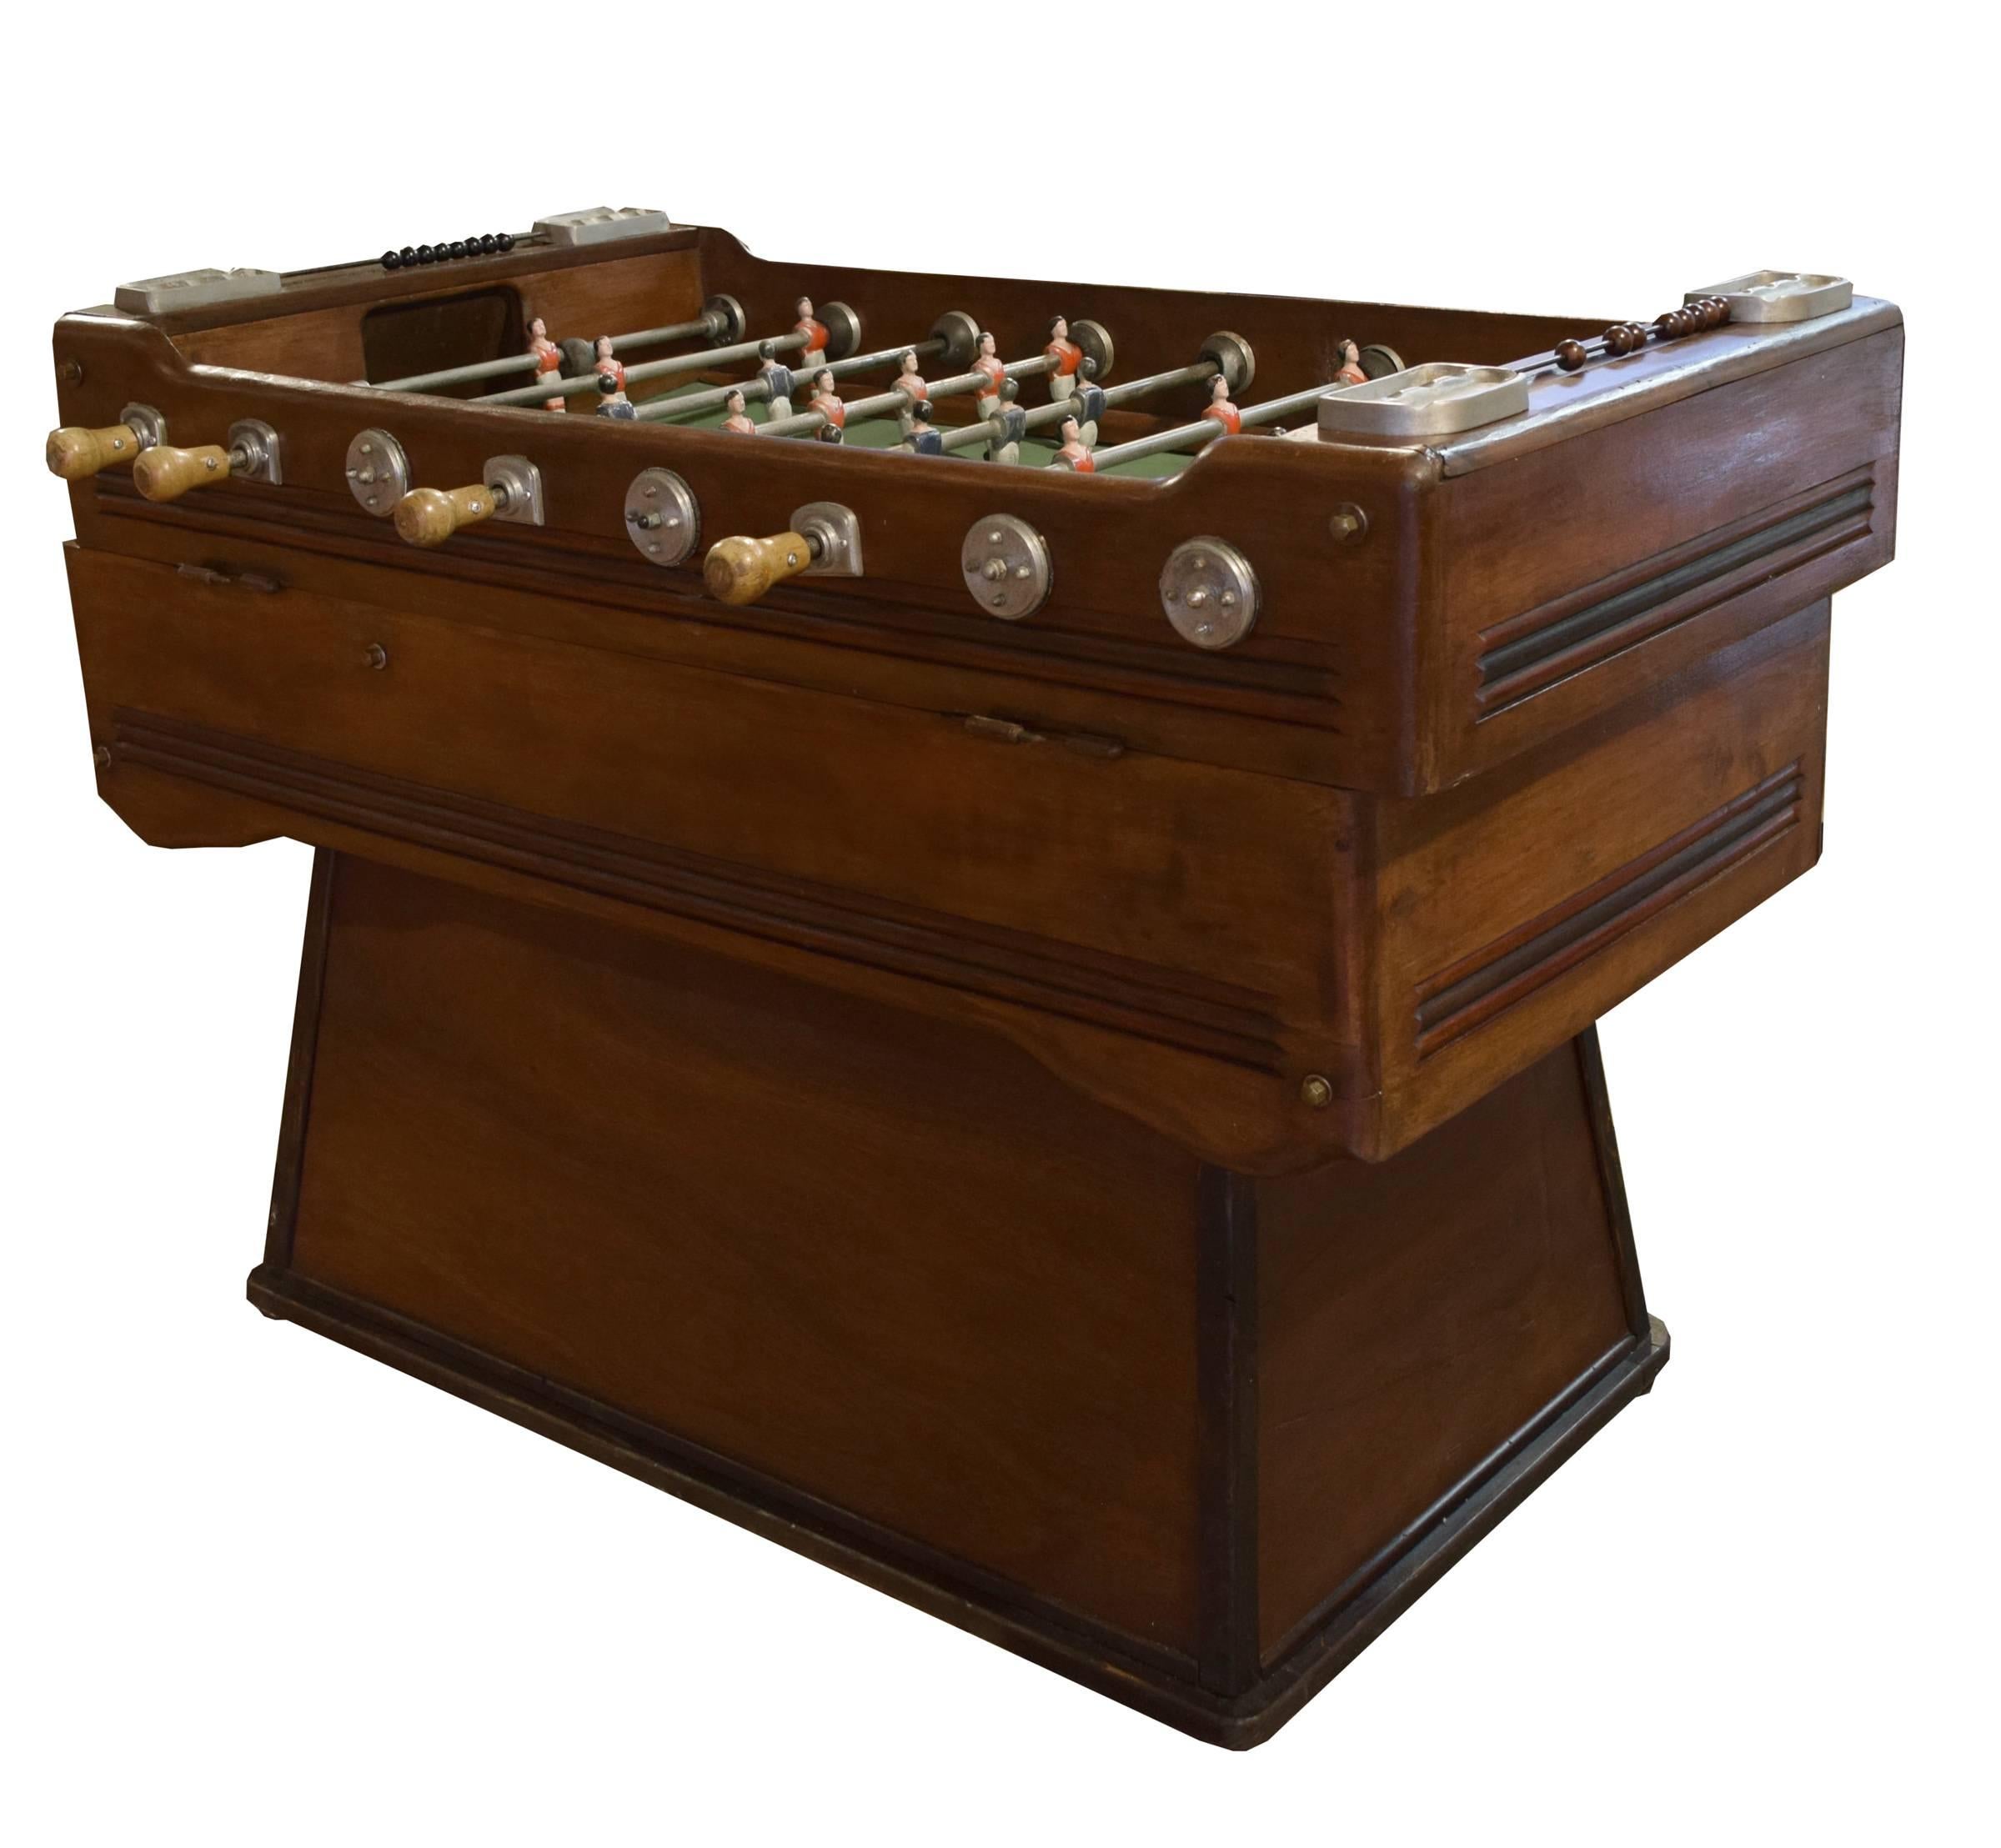 A stunning dark wood foosball table from Italy. This Mid-Century table is coin operated and features metal players painted in blue and red. There are manual scoring mechanisms on both ends, as well as four ashtrays.